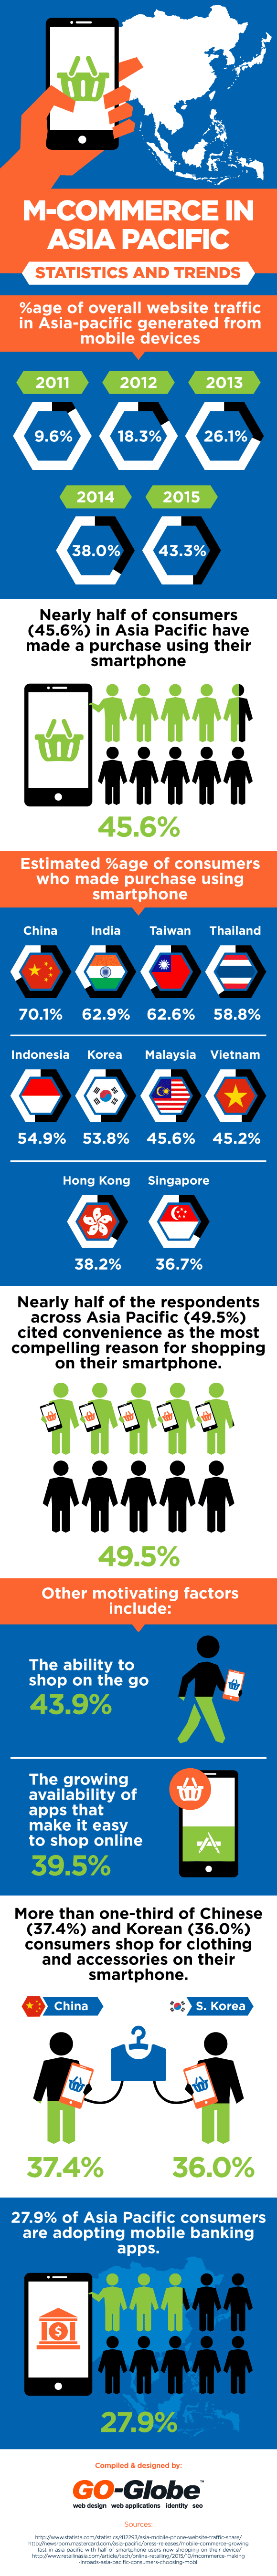 Mobile commerce in Asia Pacific